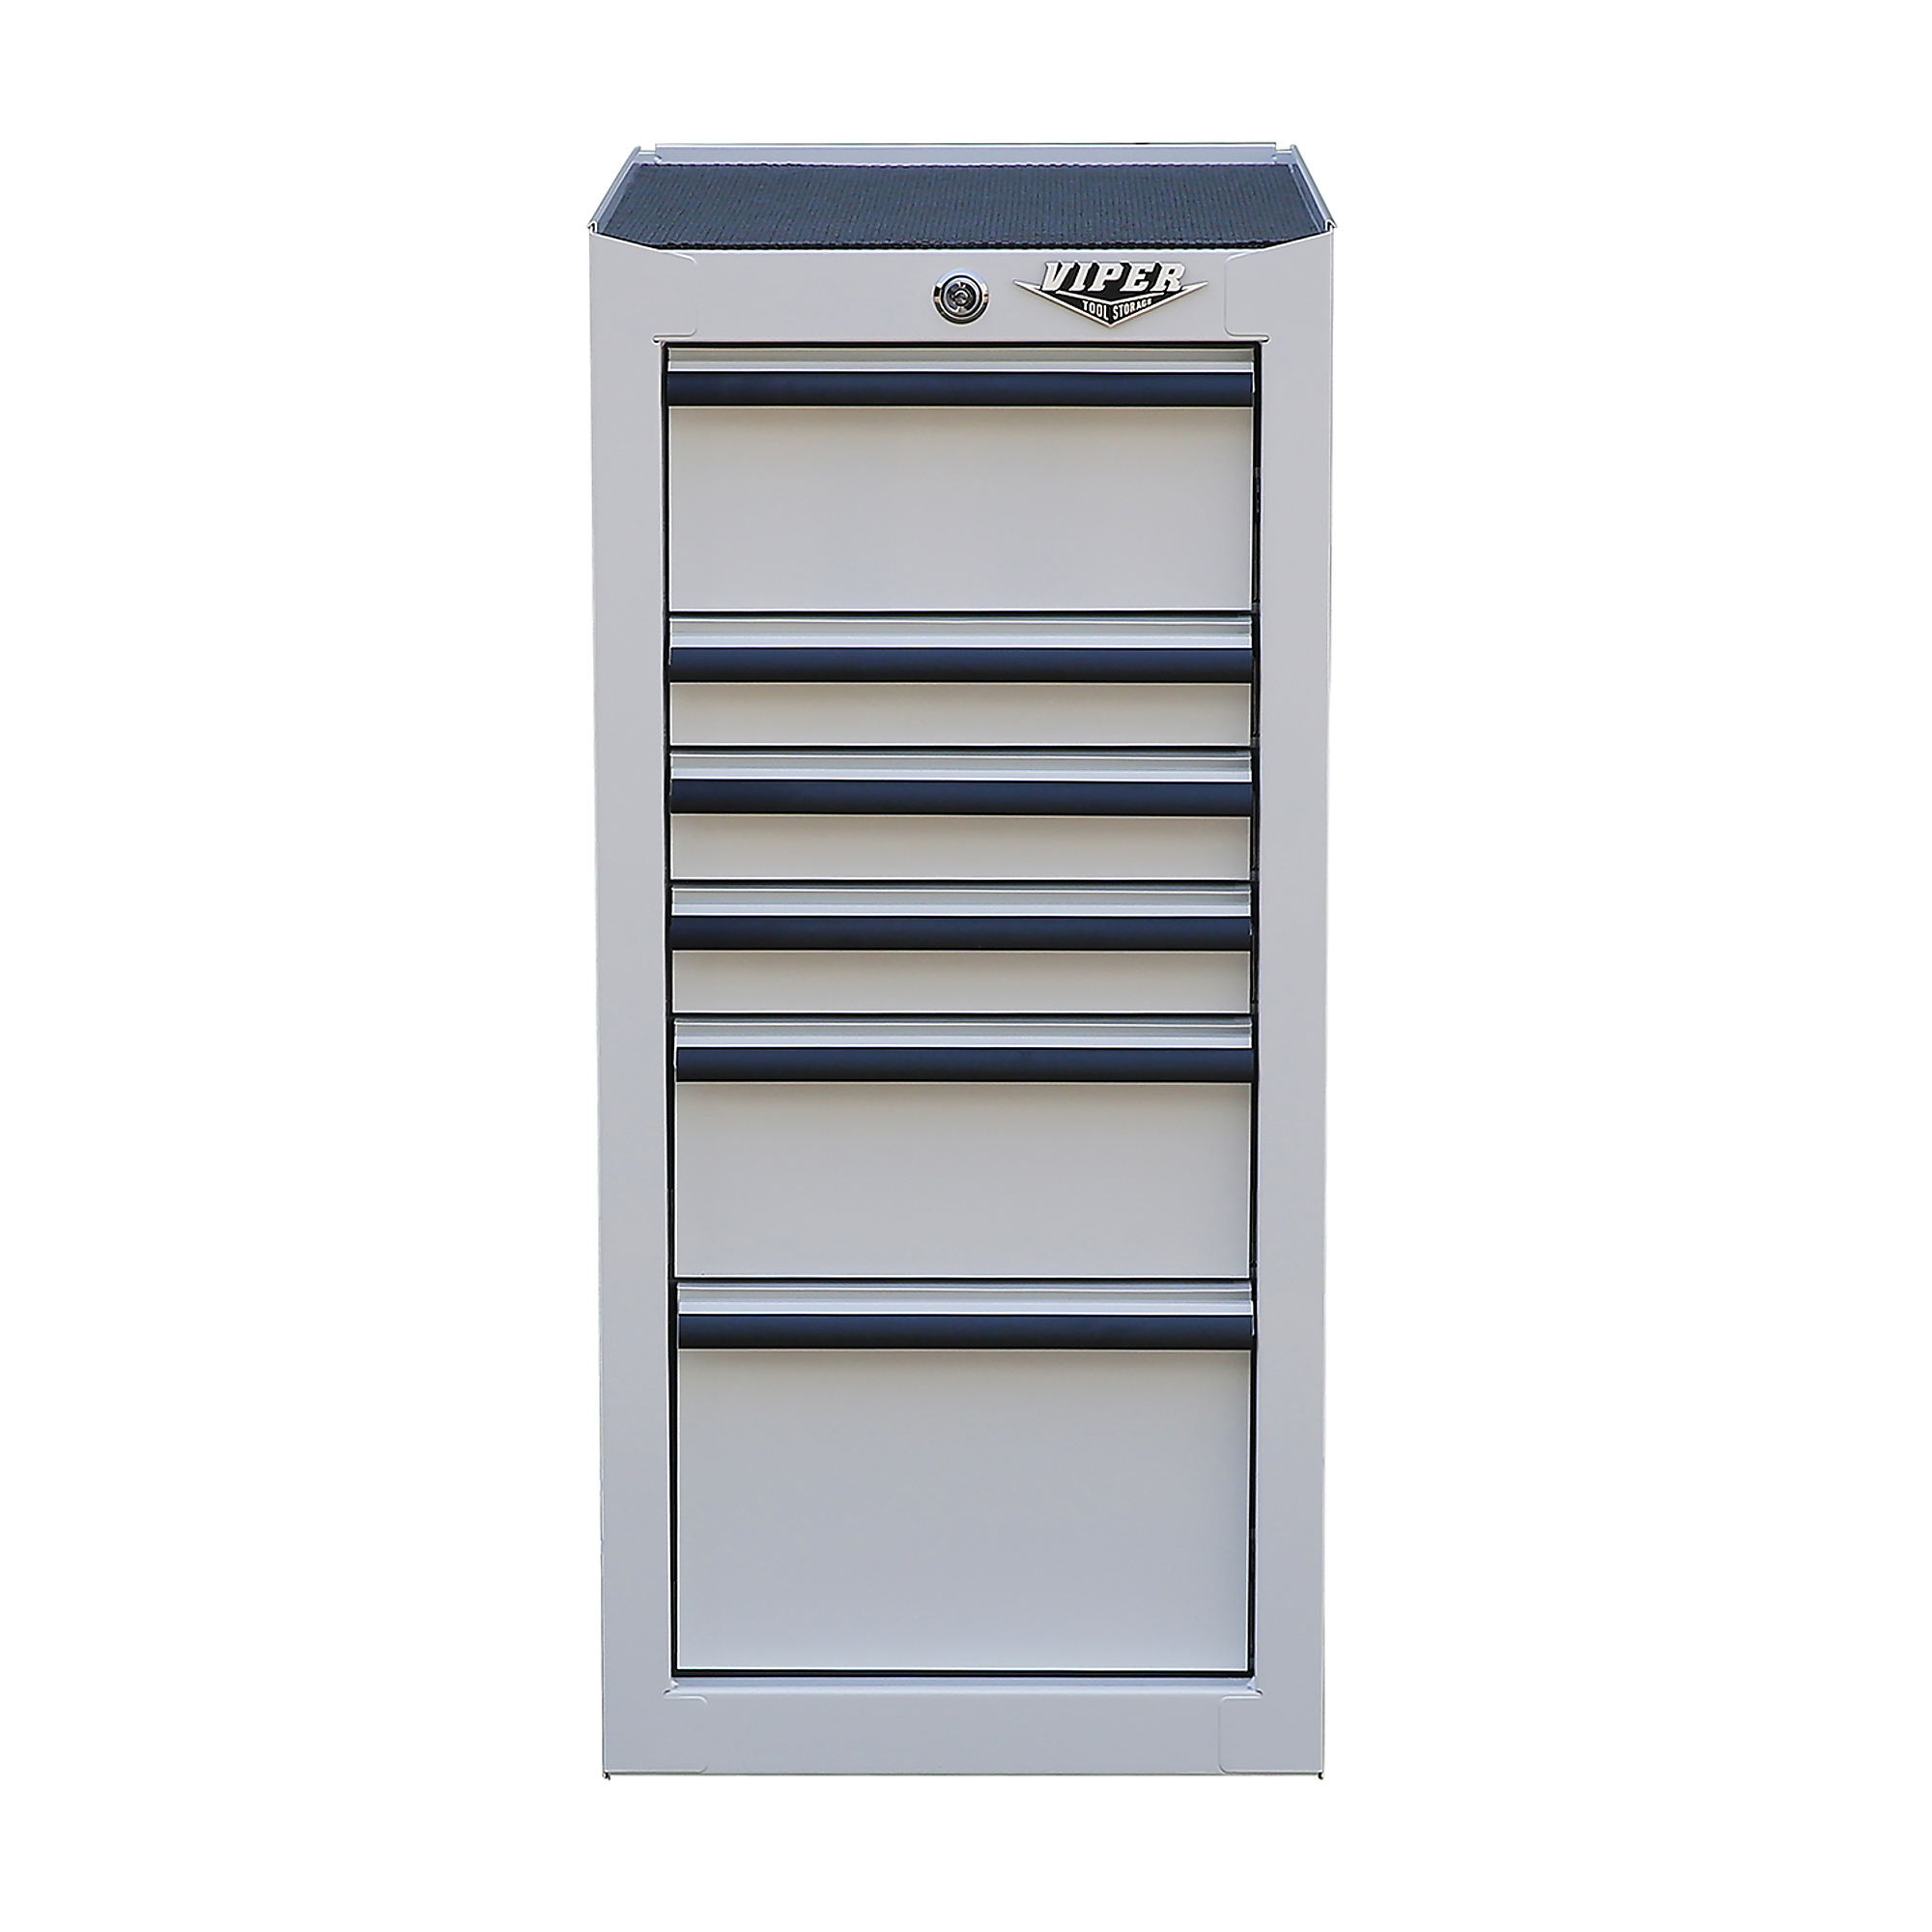 Viper Tool Storage, 6-Drawer Steel Side Cabinet, White, Width 16 in, Height 34.38 in, Color White, Model V1606SCWH